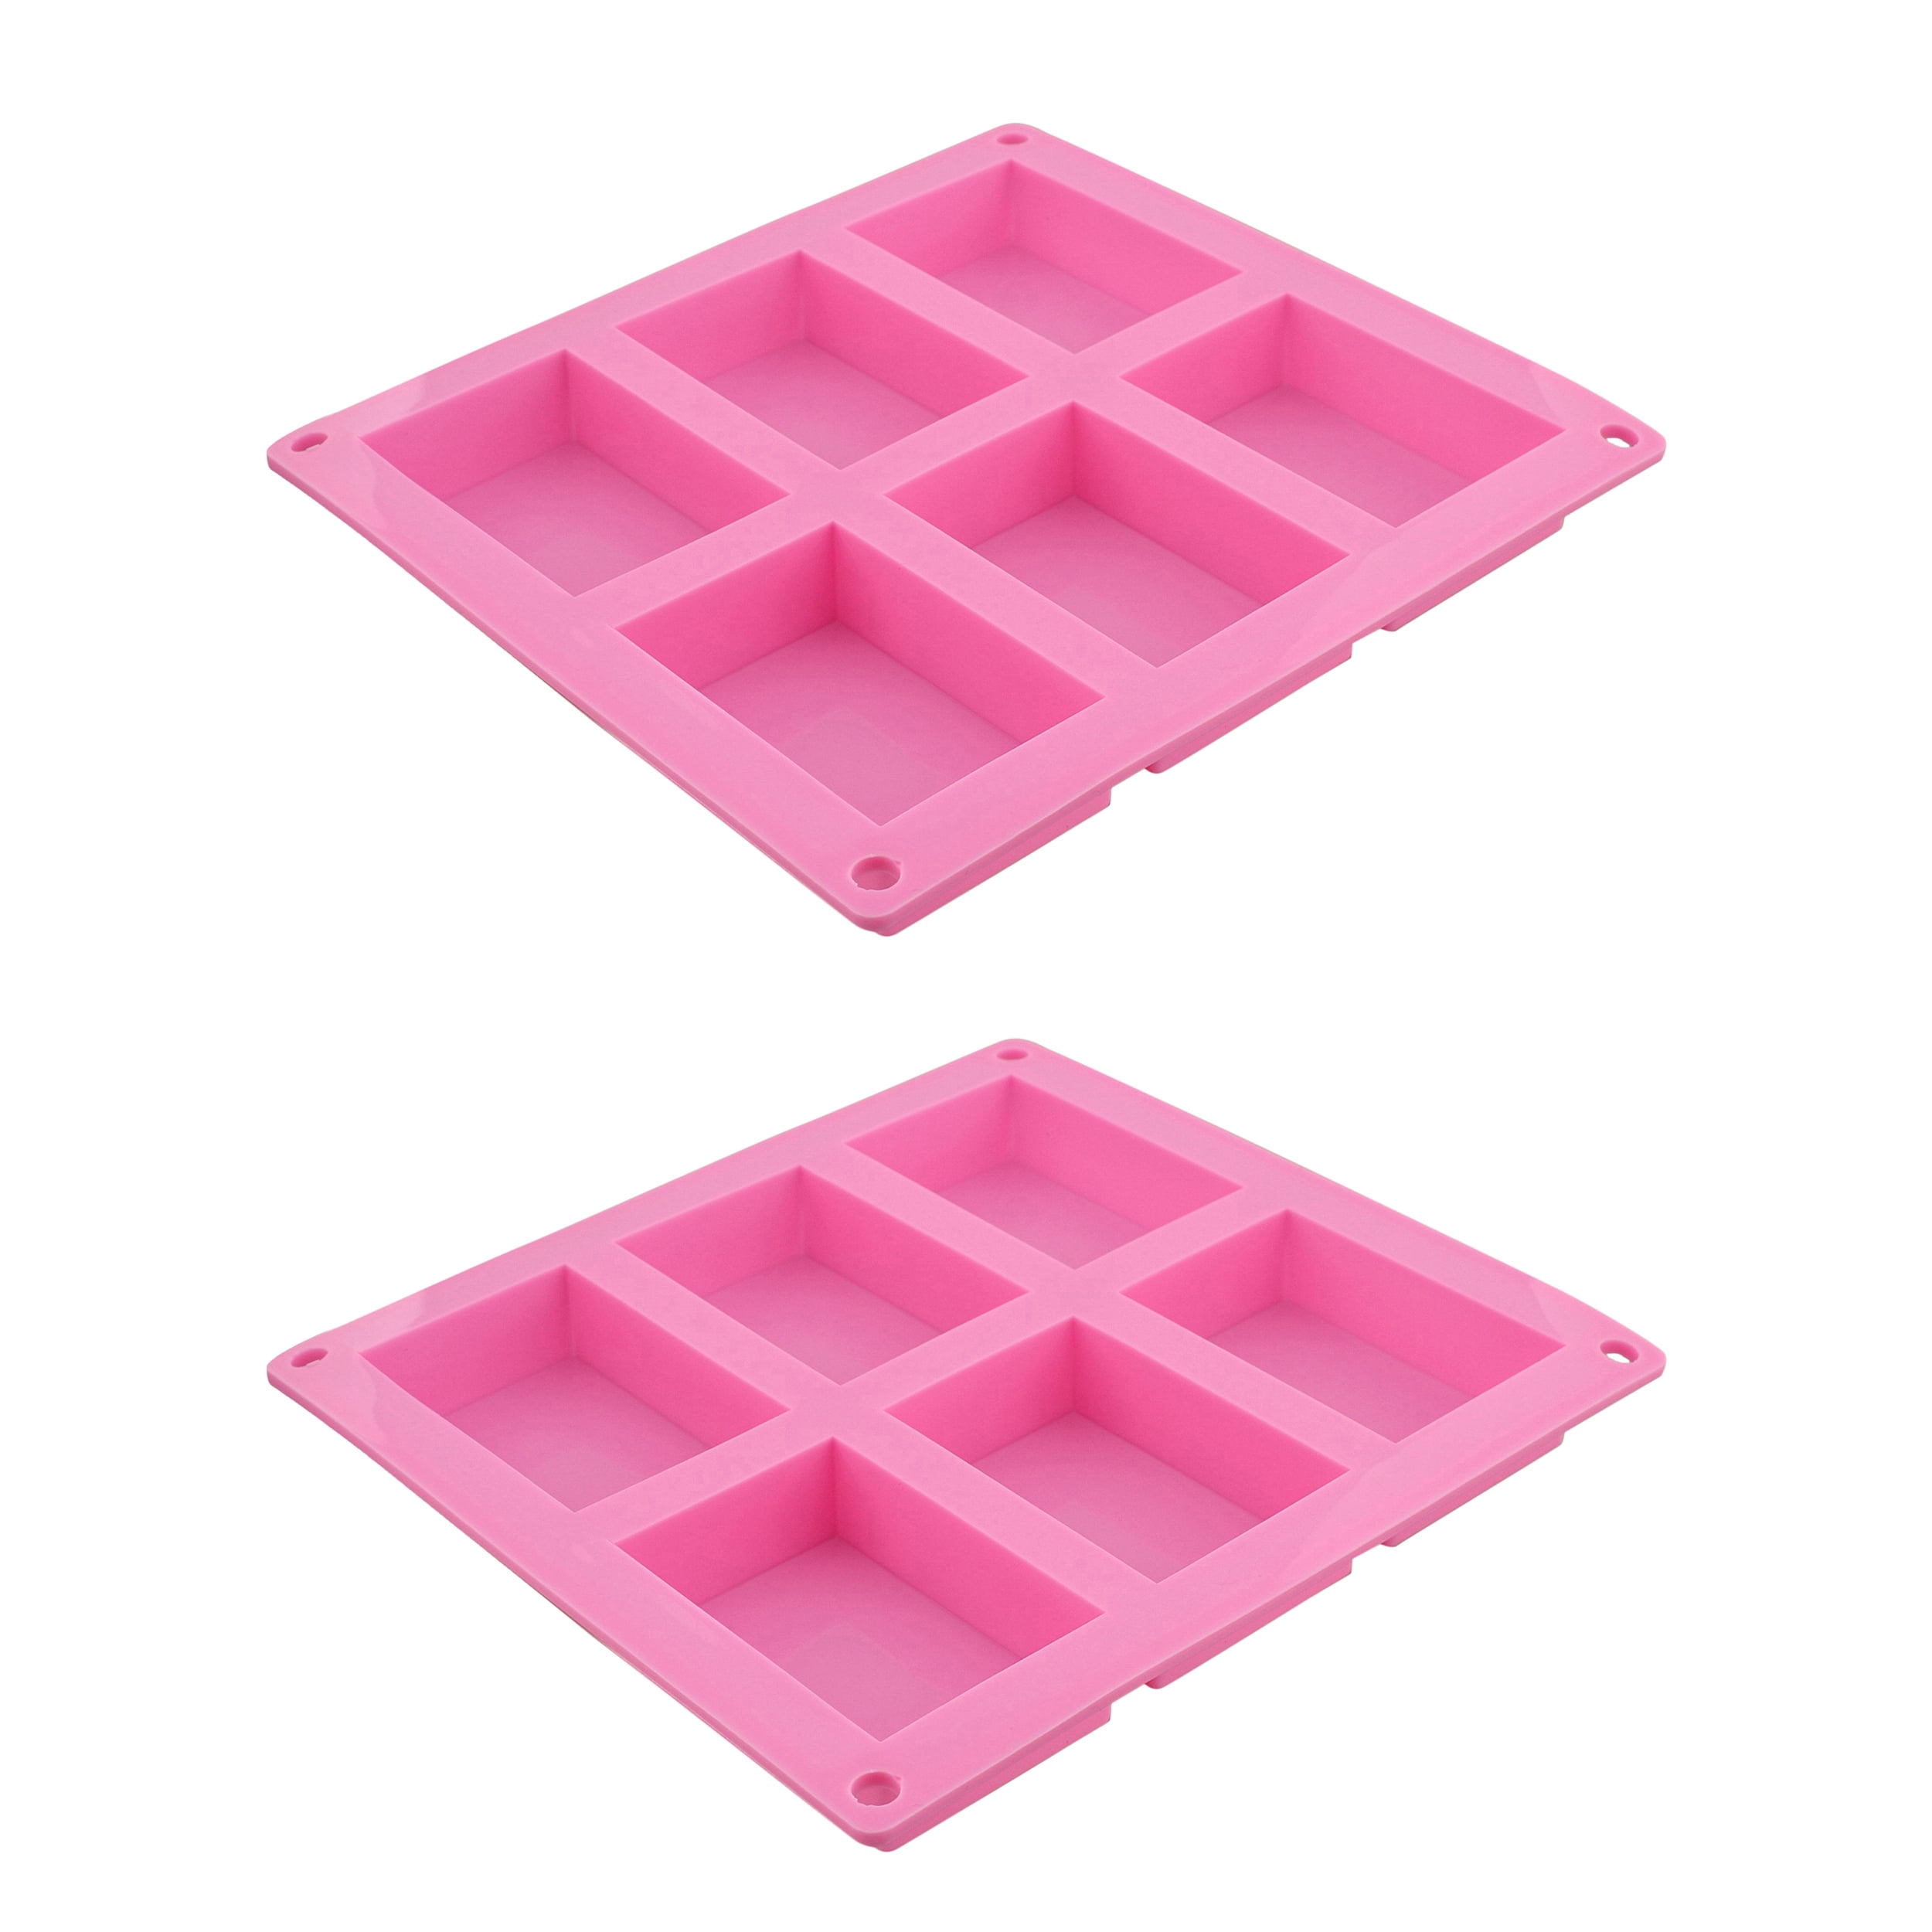  Rectangle Silicone Soap Mold 4oz Large Soap Molds for